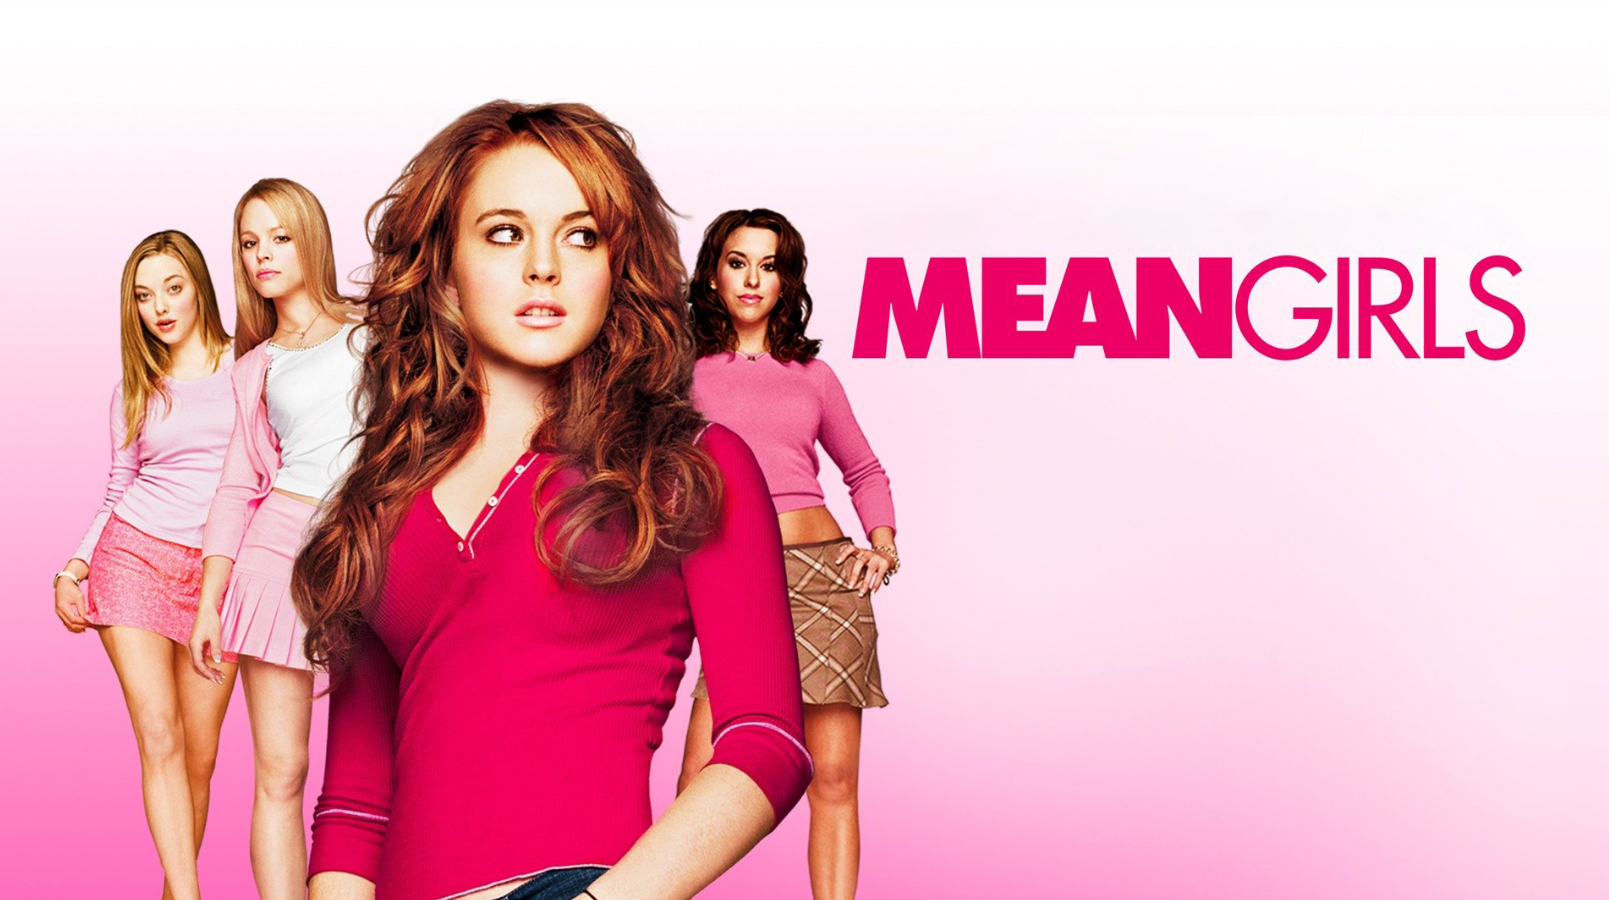 75 Mean Girls  Android iPhone Desktop HD Backgrounds  Wallpapers  1080p 4k